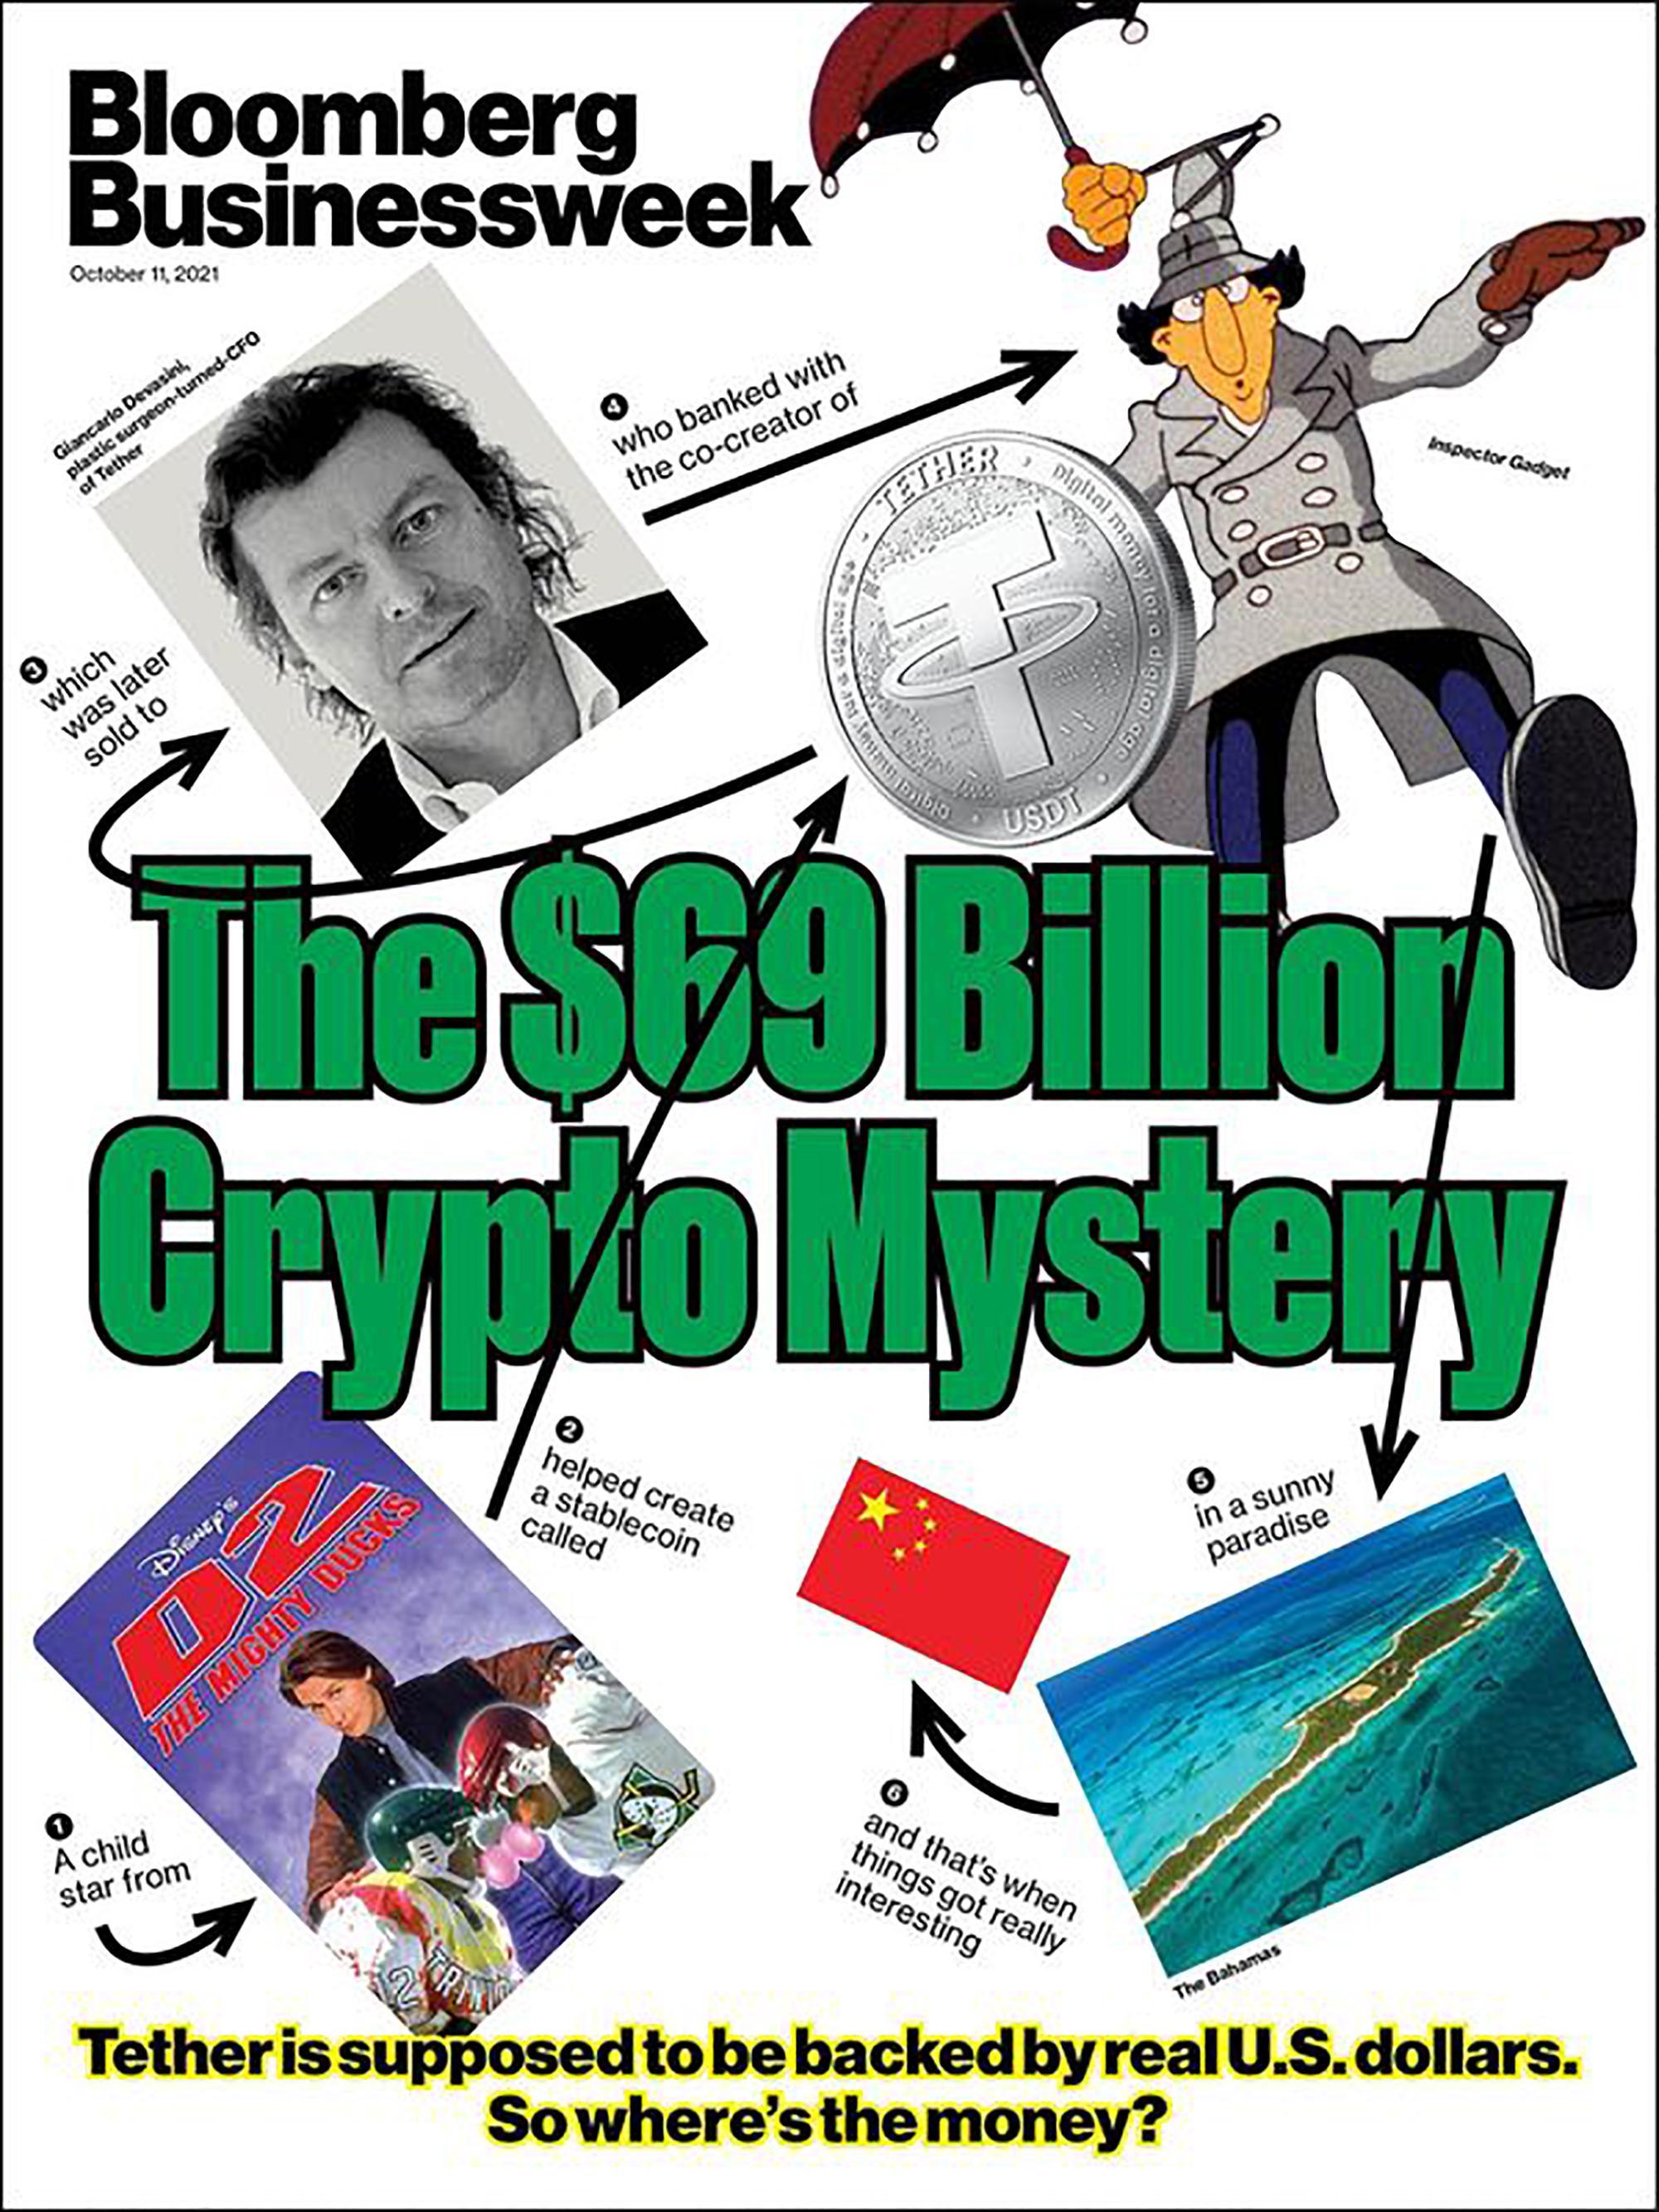 The owner of Tether and Bitfinex, Giancarlo Devasini, on the cover of Bloomberg Businessweek in October 2021. In February 2022 he opened a chapter of Bitfinex in El Salvador. The company will issue one billion dollars